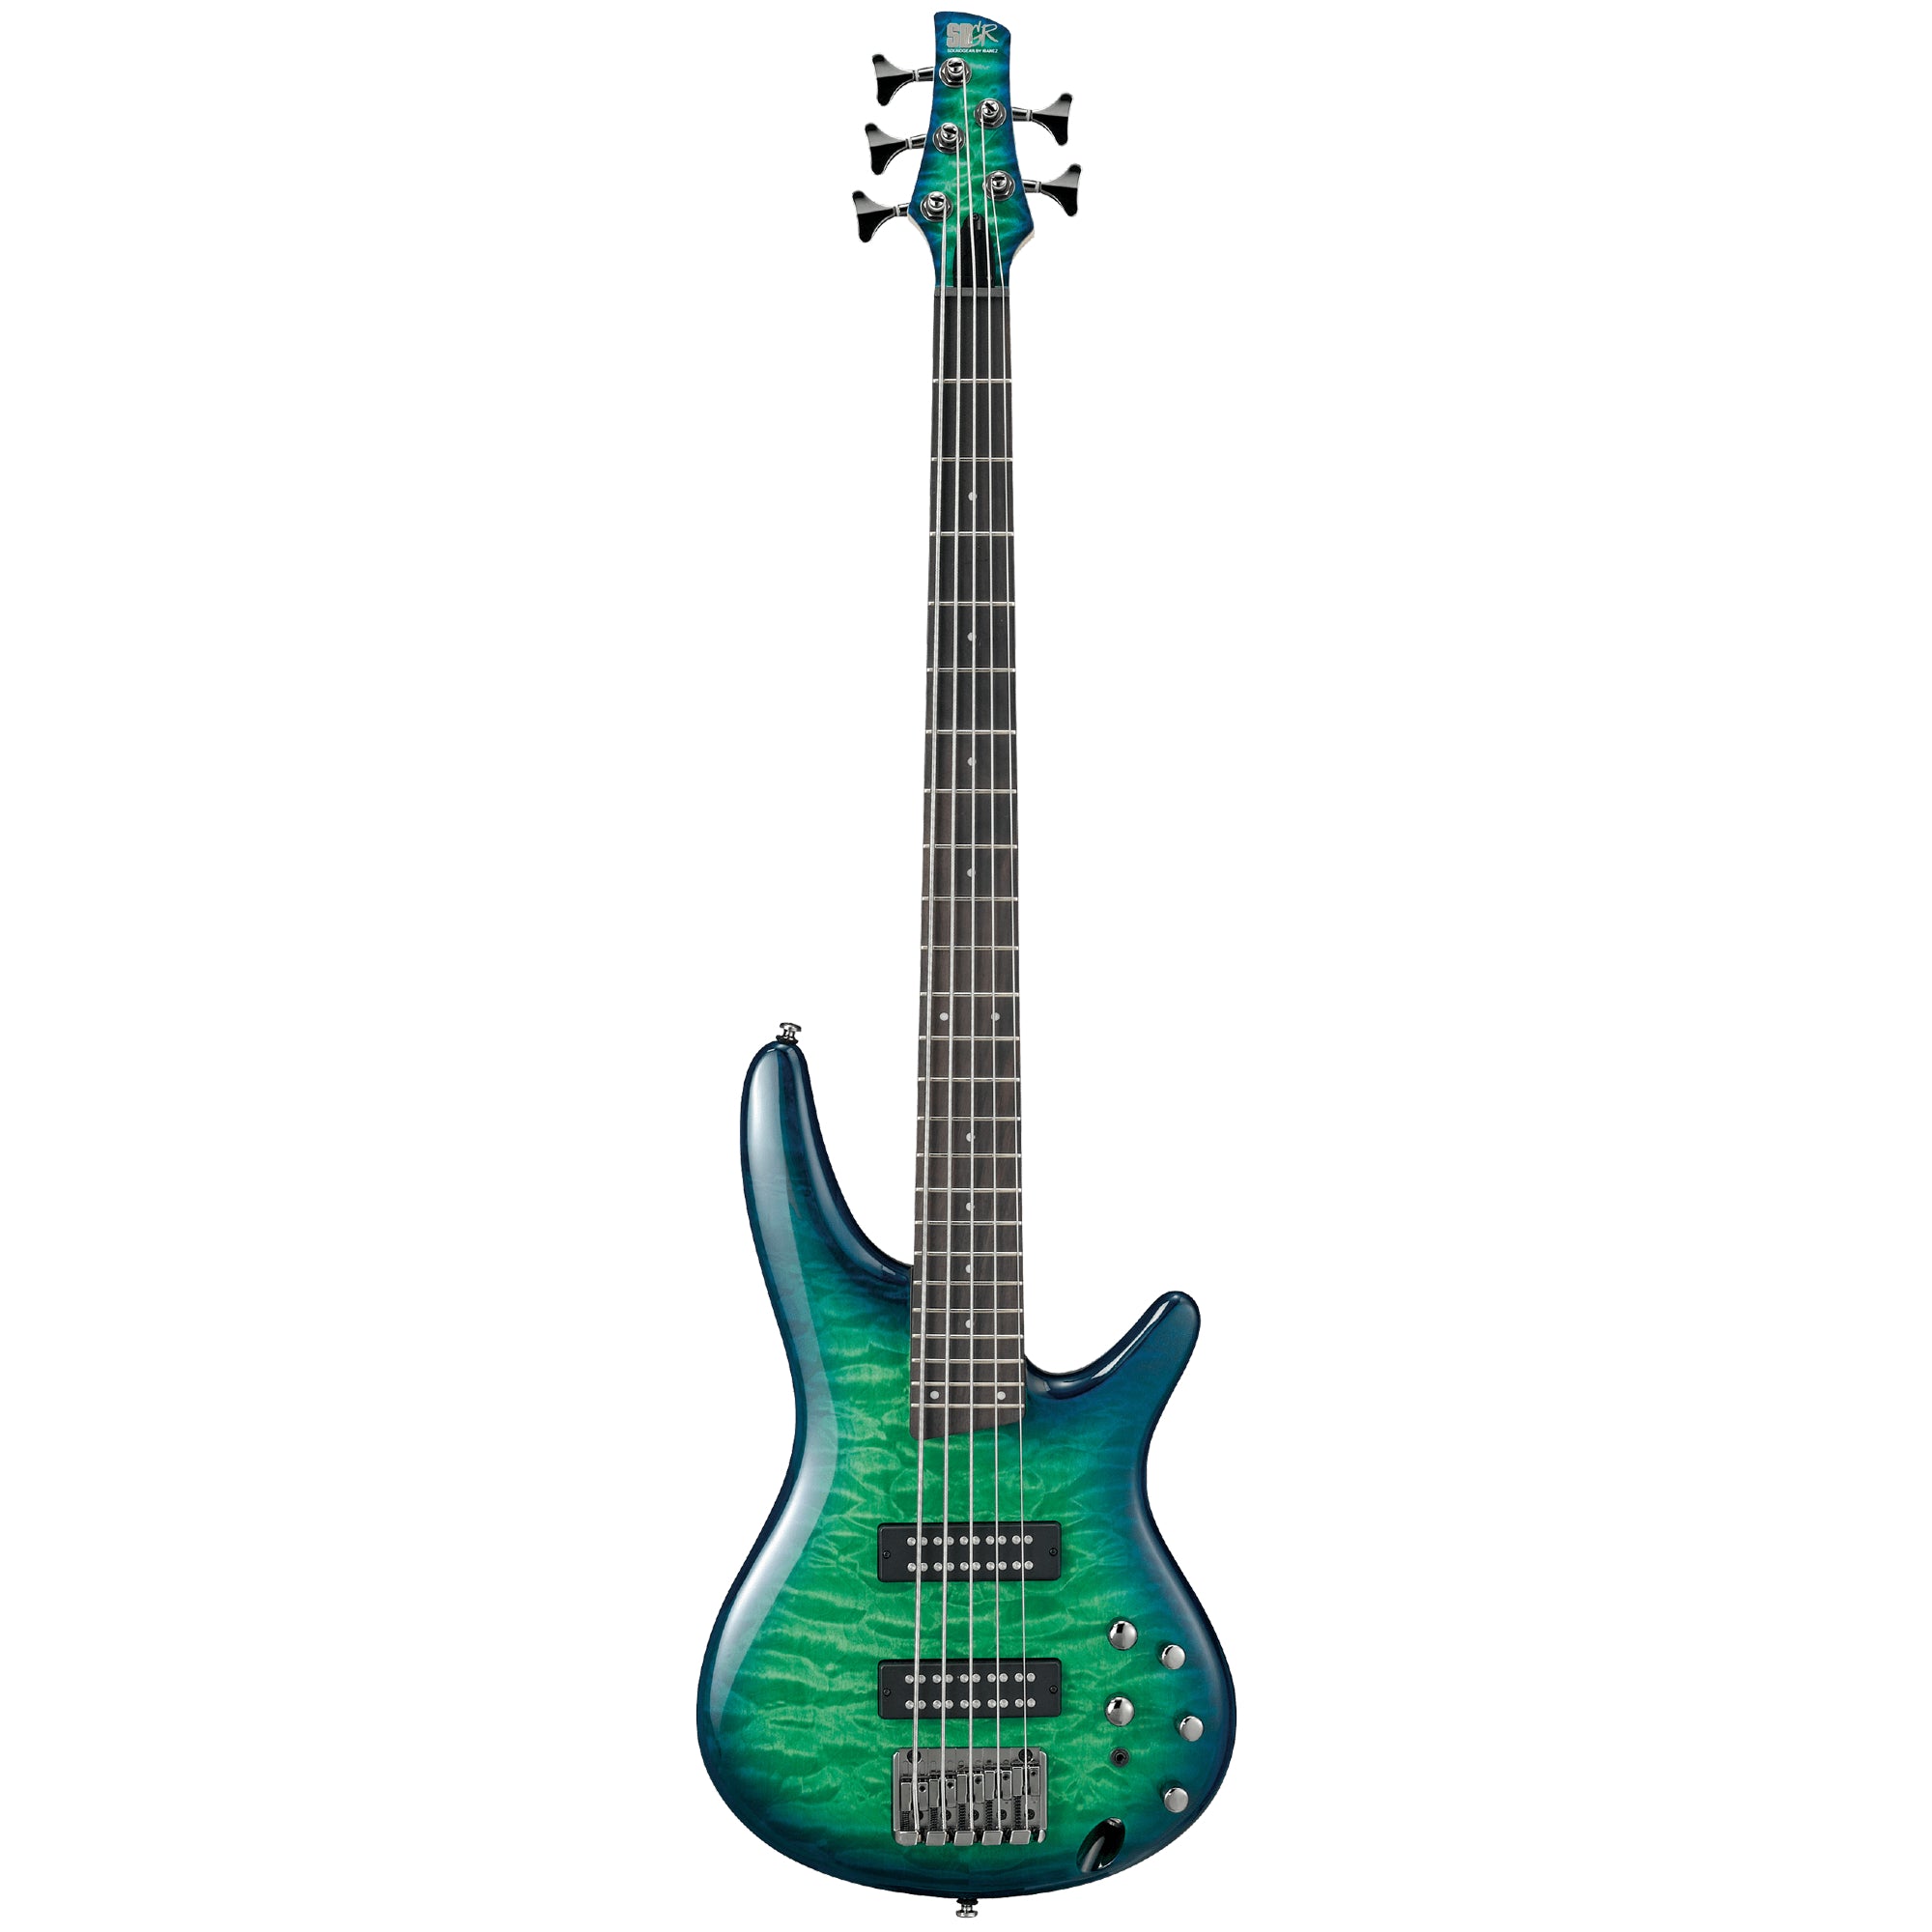 Ibanez SR405EQMSLG 5-String Quilted Maple Electric Bass - Surreal Blue Burst Gloss